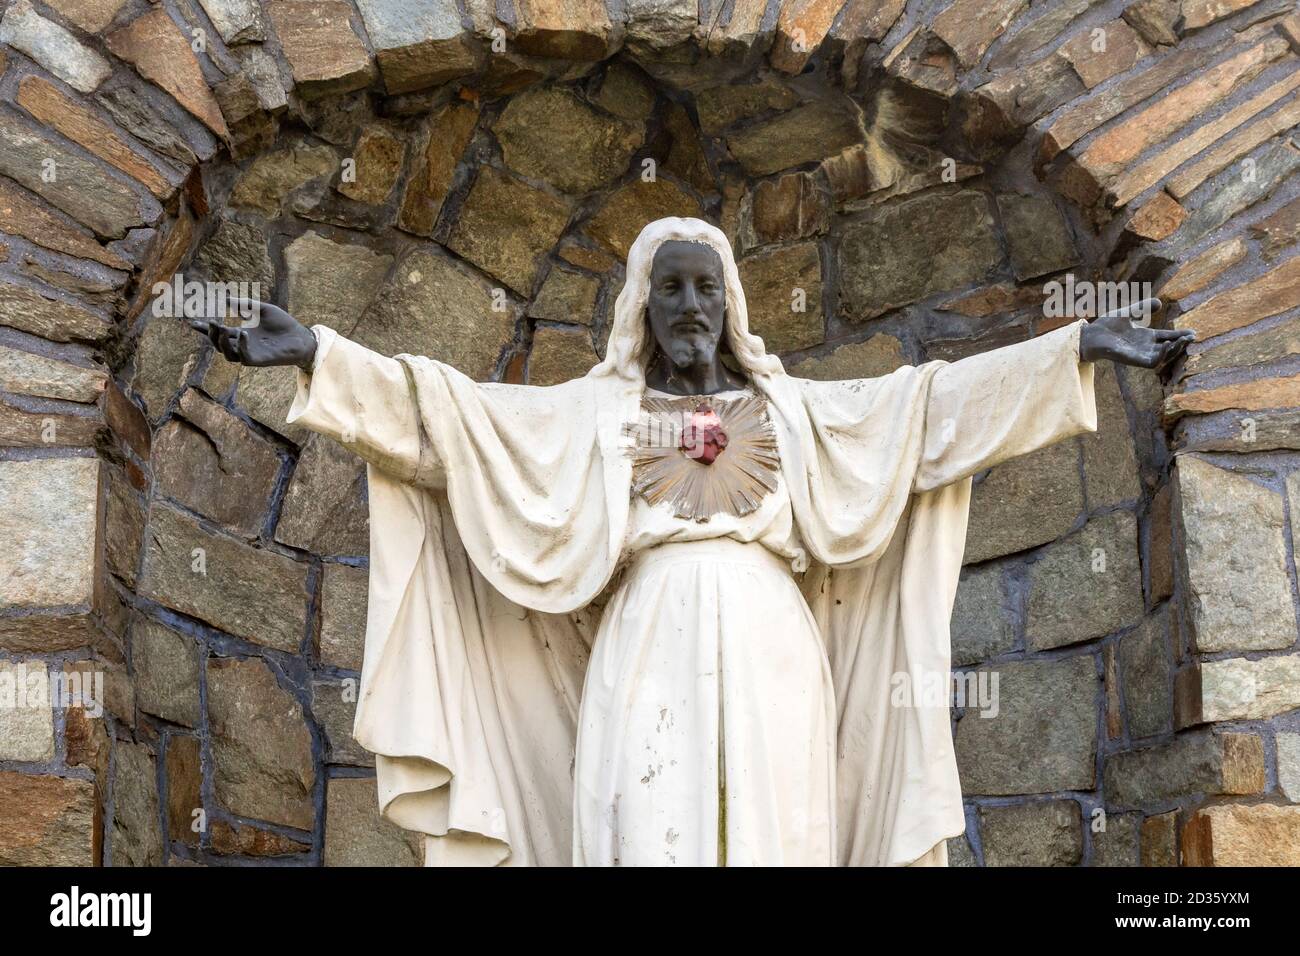 Detroit, Michigan - A statue of a black Jesus at Sacred Heart Major Seminary. Made of white stone in 1957, the statue's face, hands, and feet were pai Stock Photo